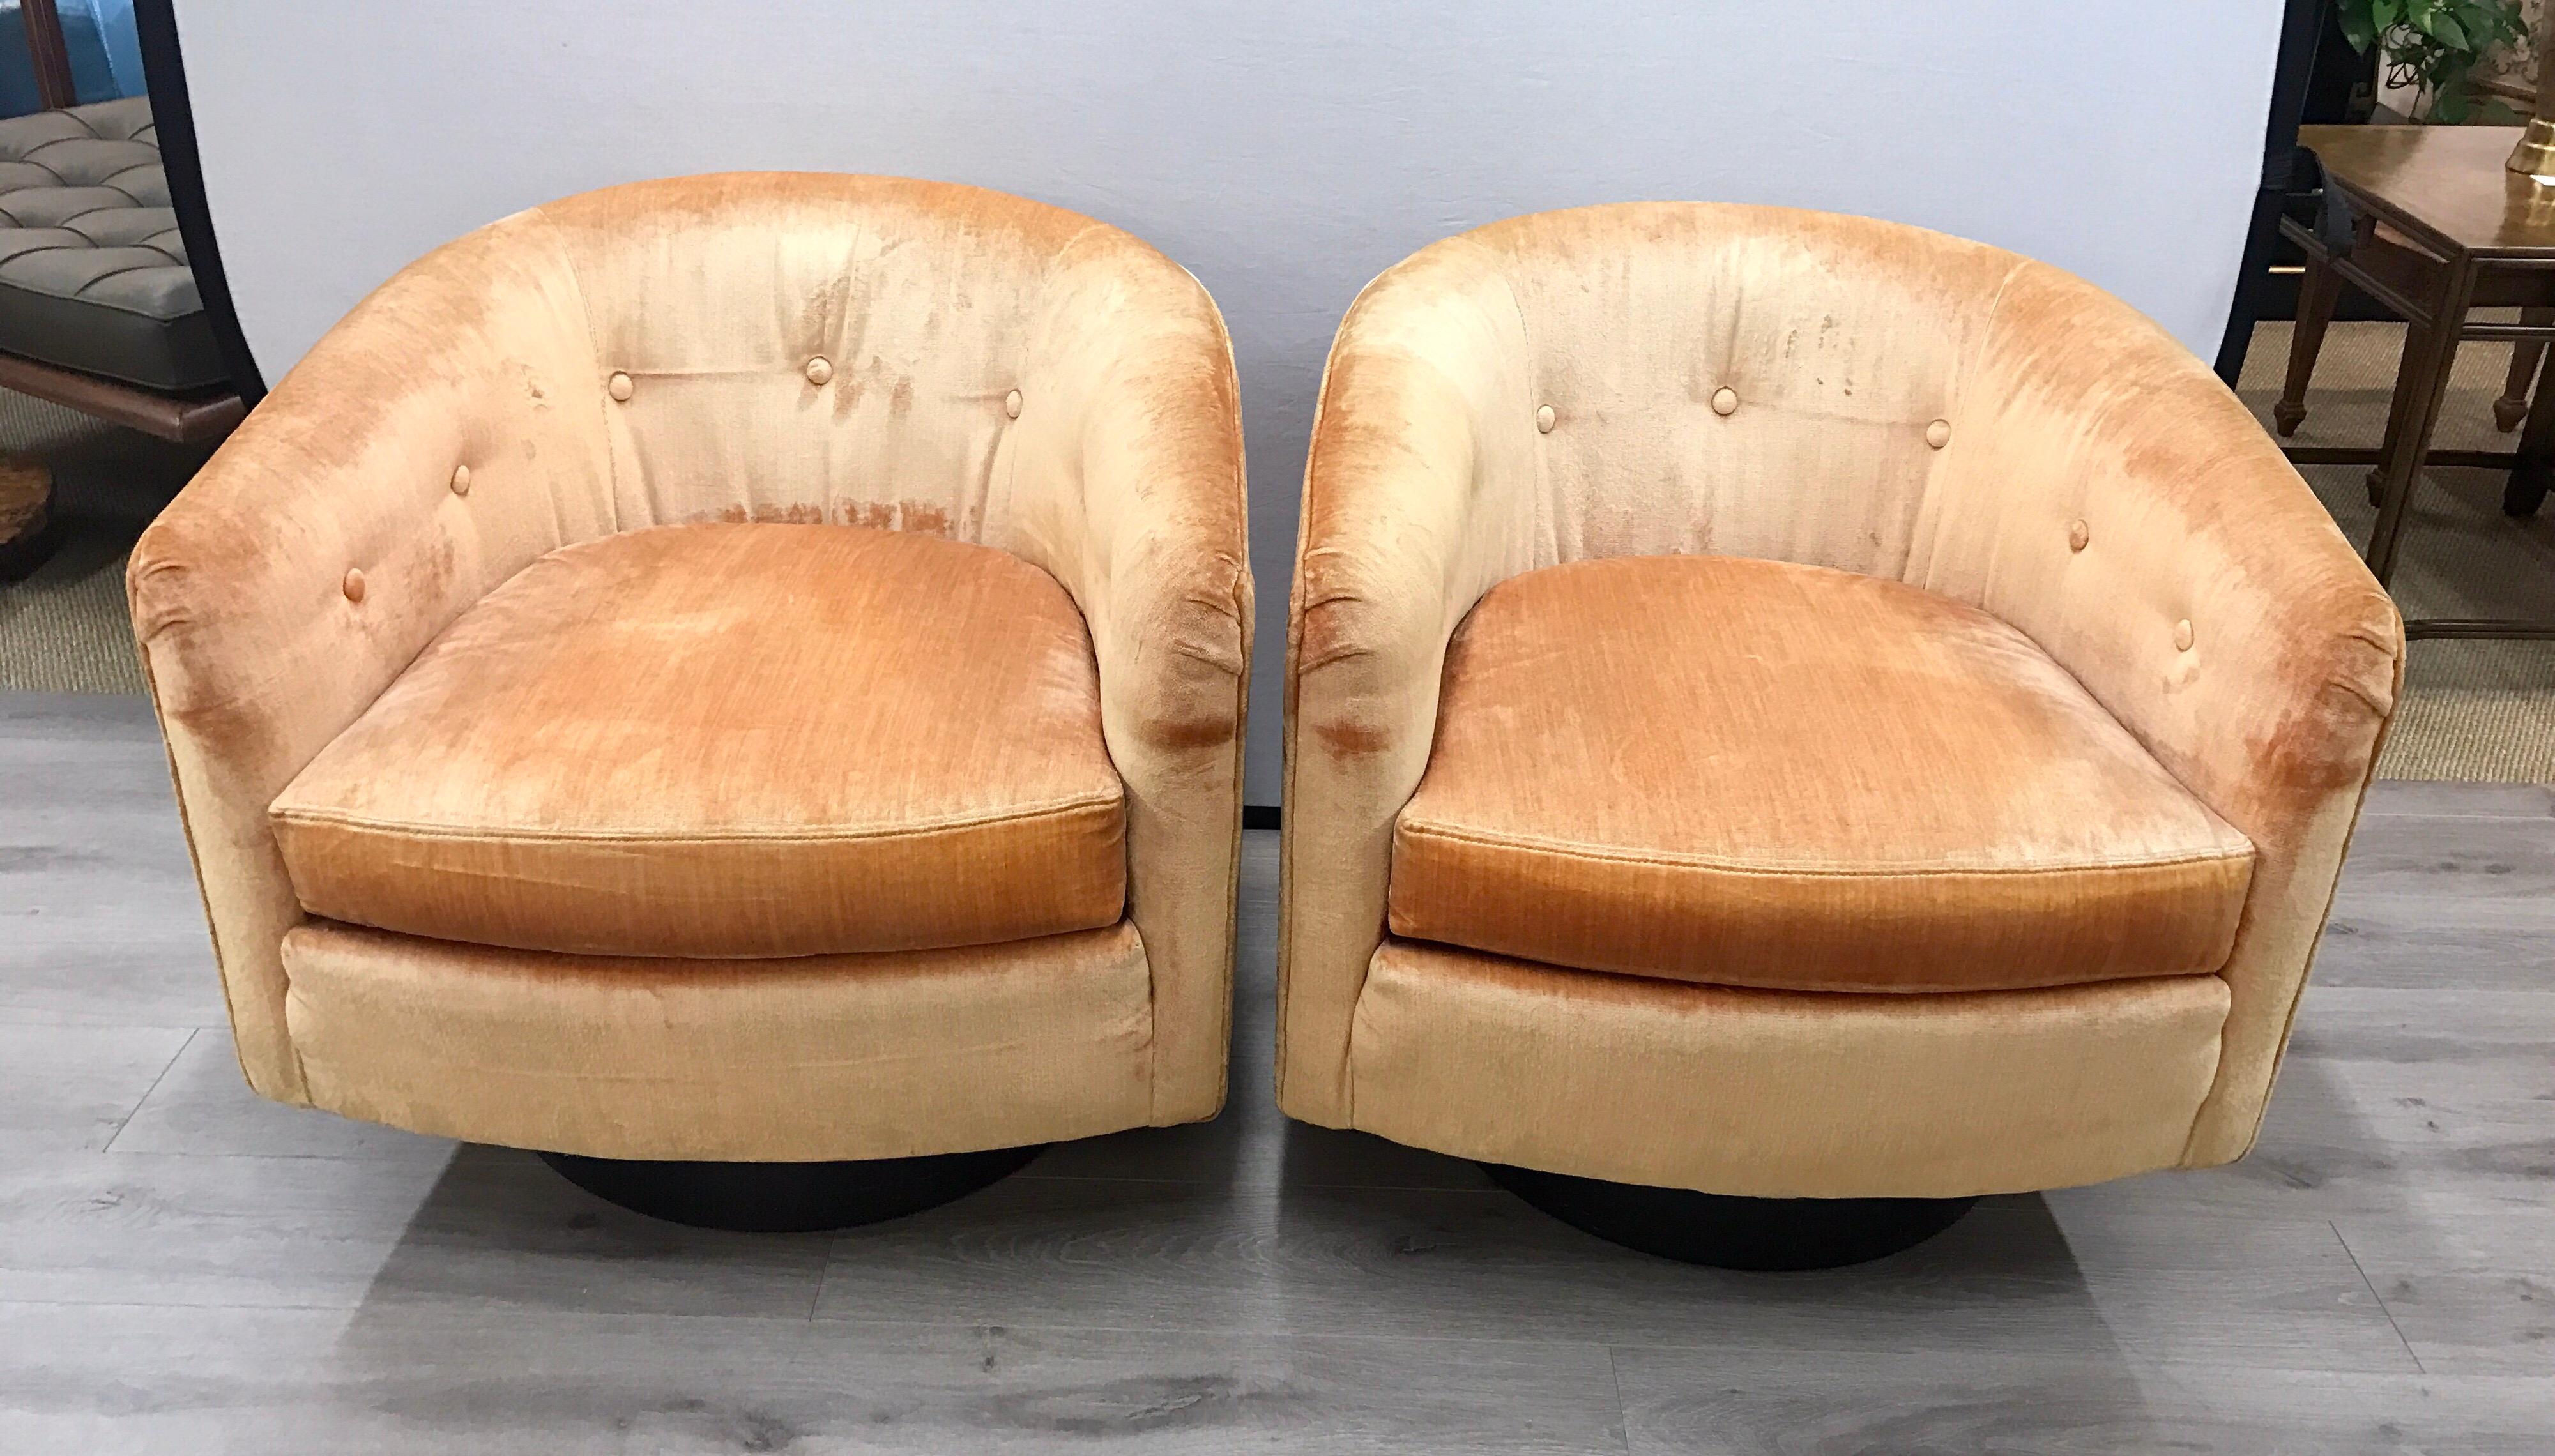 Gorgeous set of midcentury 360 degree swivel chairs with peach colored velvet upholstery.